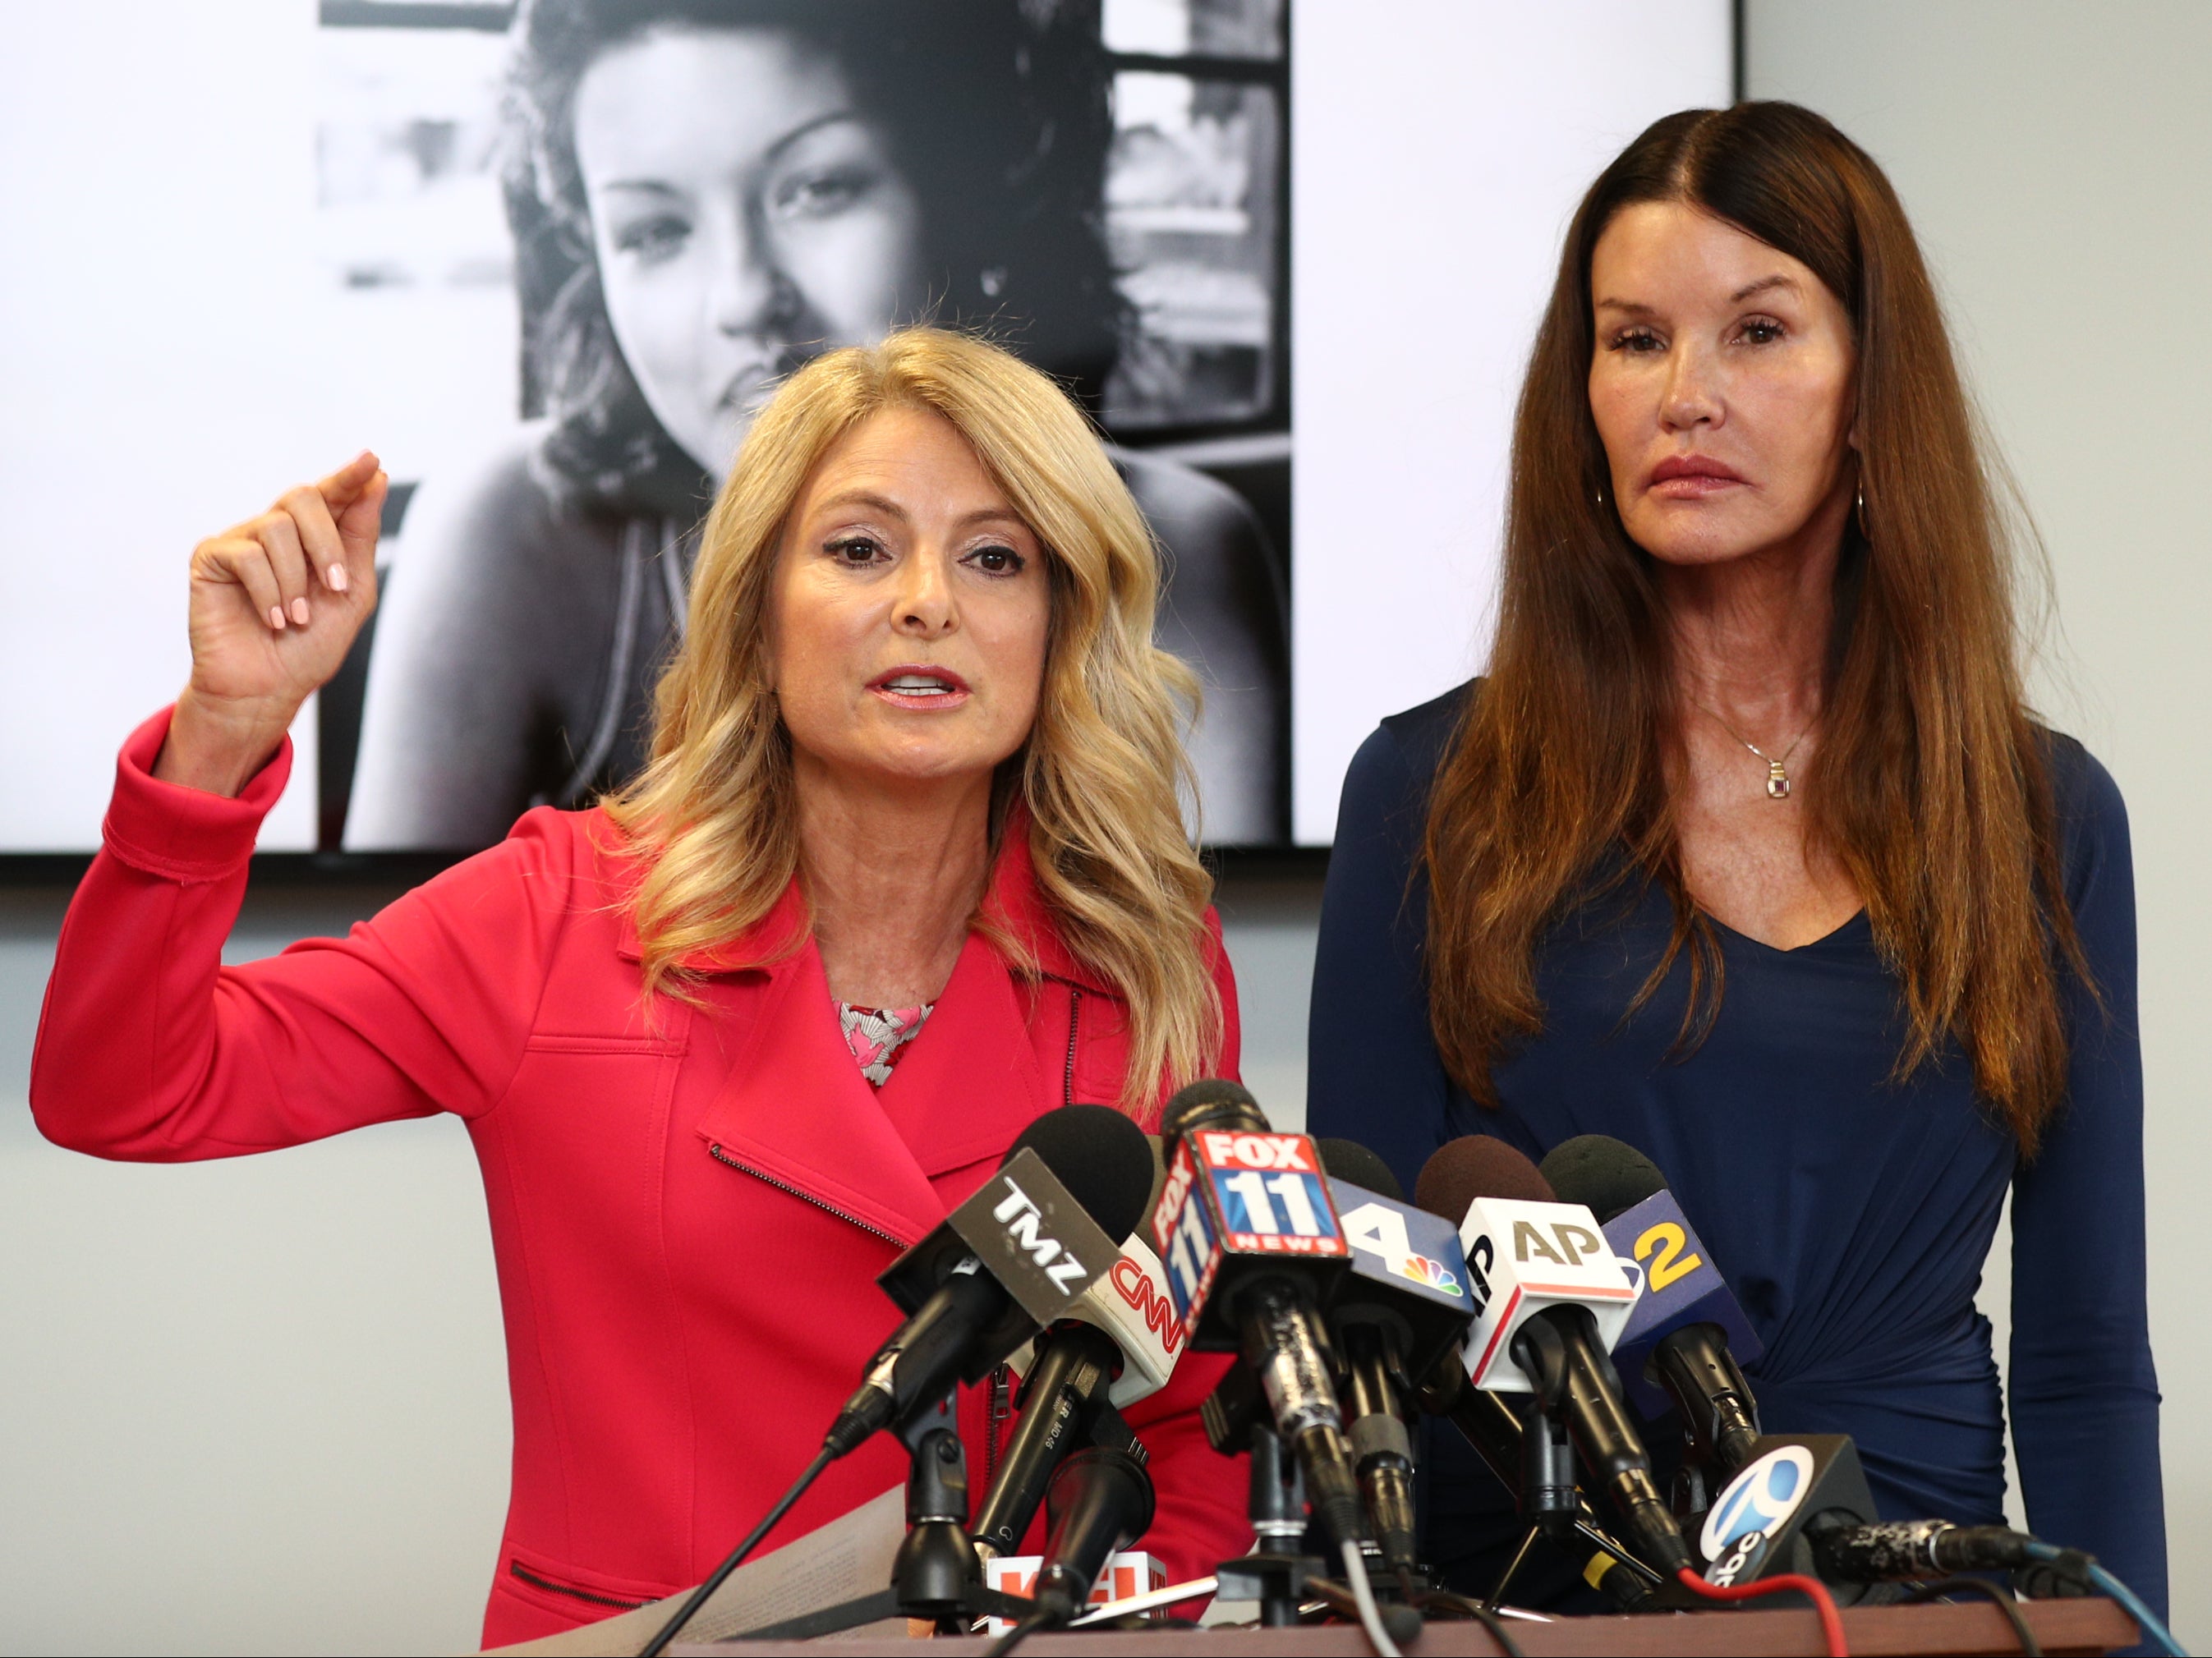 Lisa Bloom and Janice Dickinson speak during a press conference announcing a settlement in a defamation lawsuit against Bill Cosby